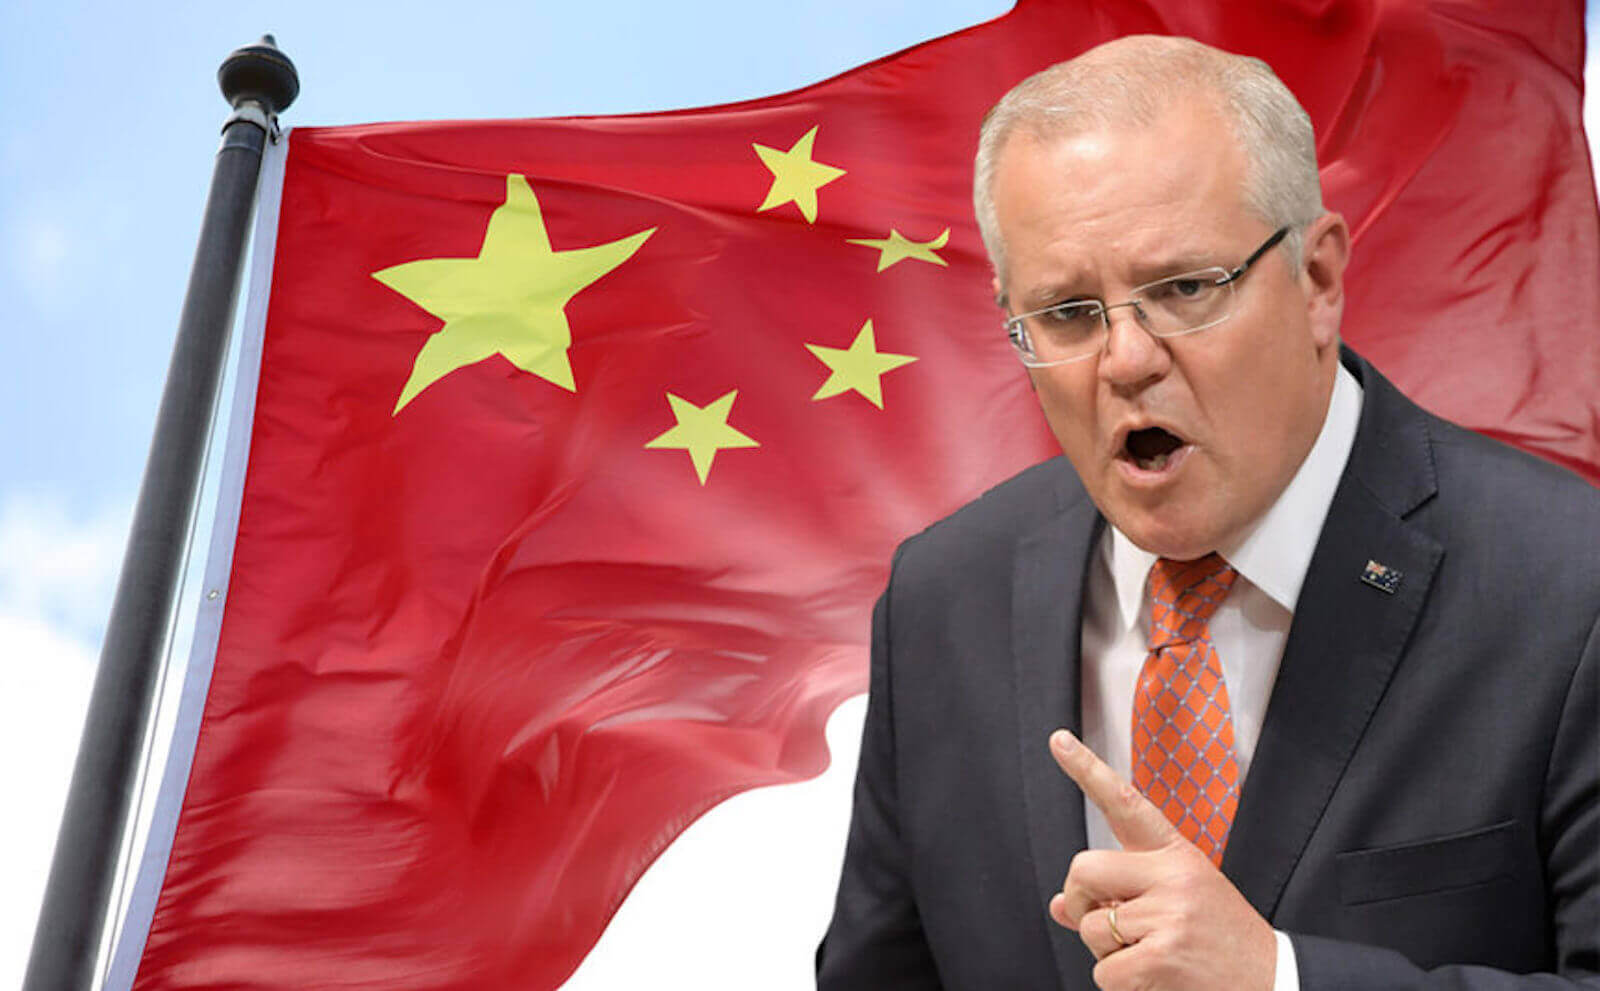 Australian PM Morrison Suggests Engaging With China to Avoid Cold War